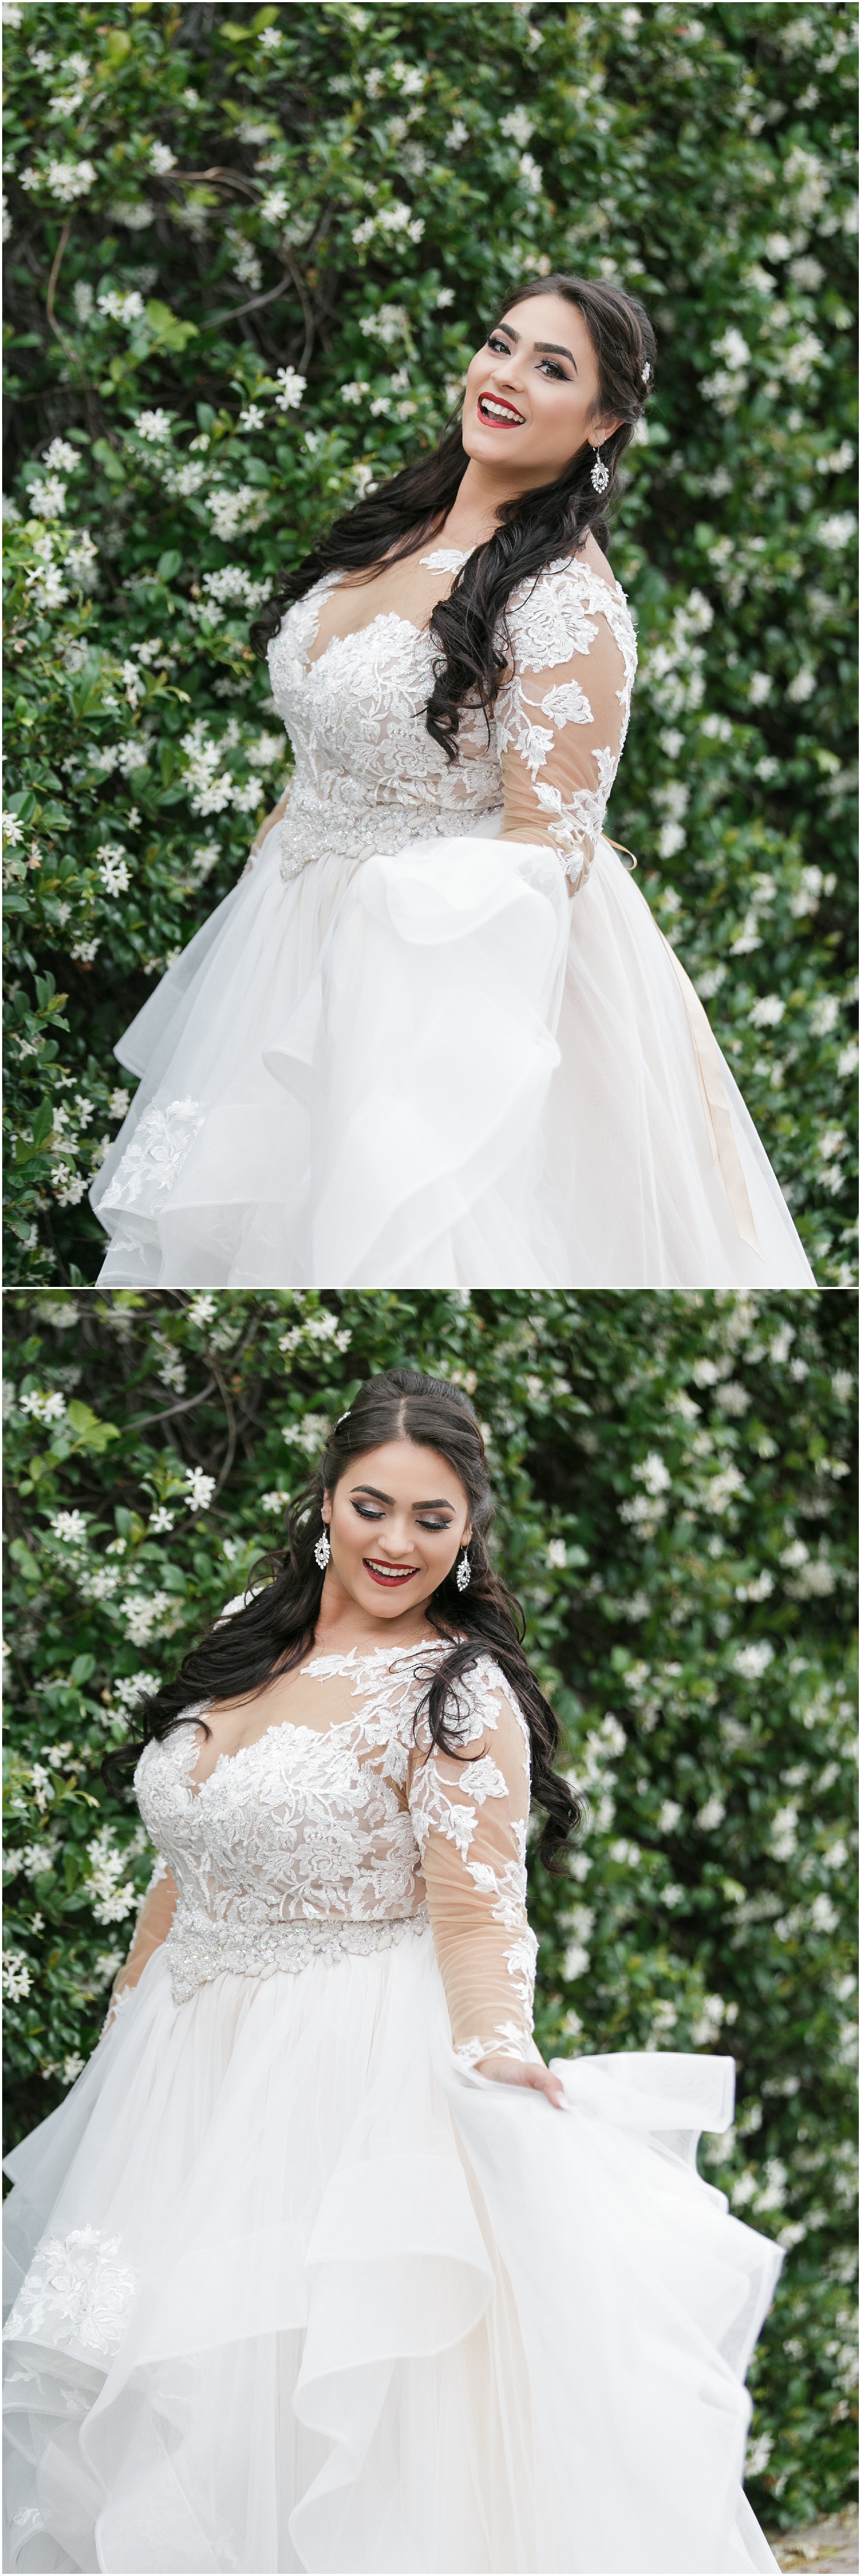 Portraits of the bride in her wedding dress. 